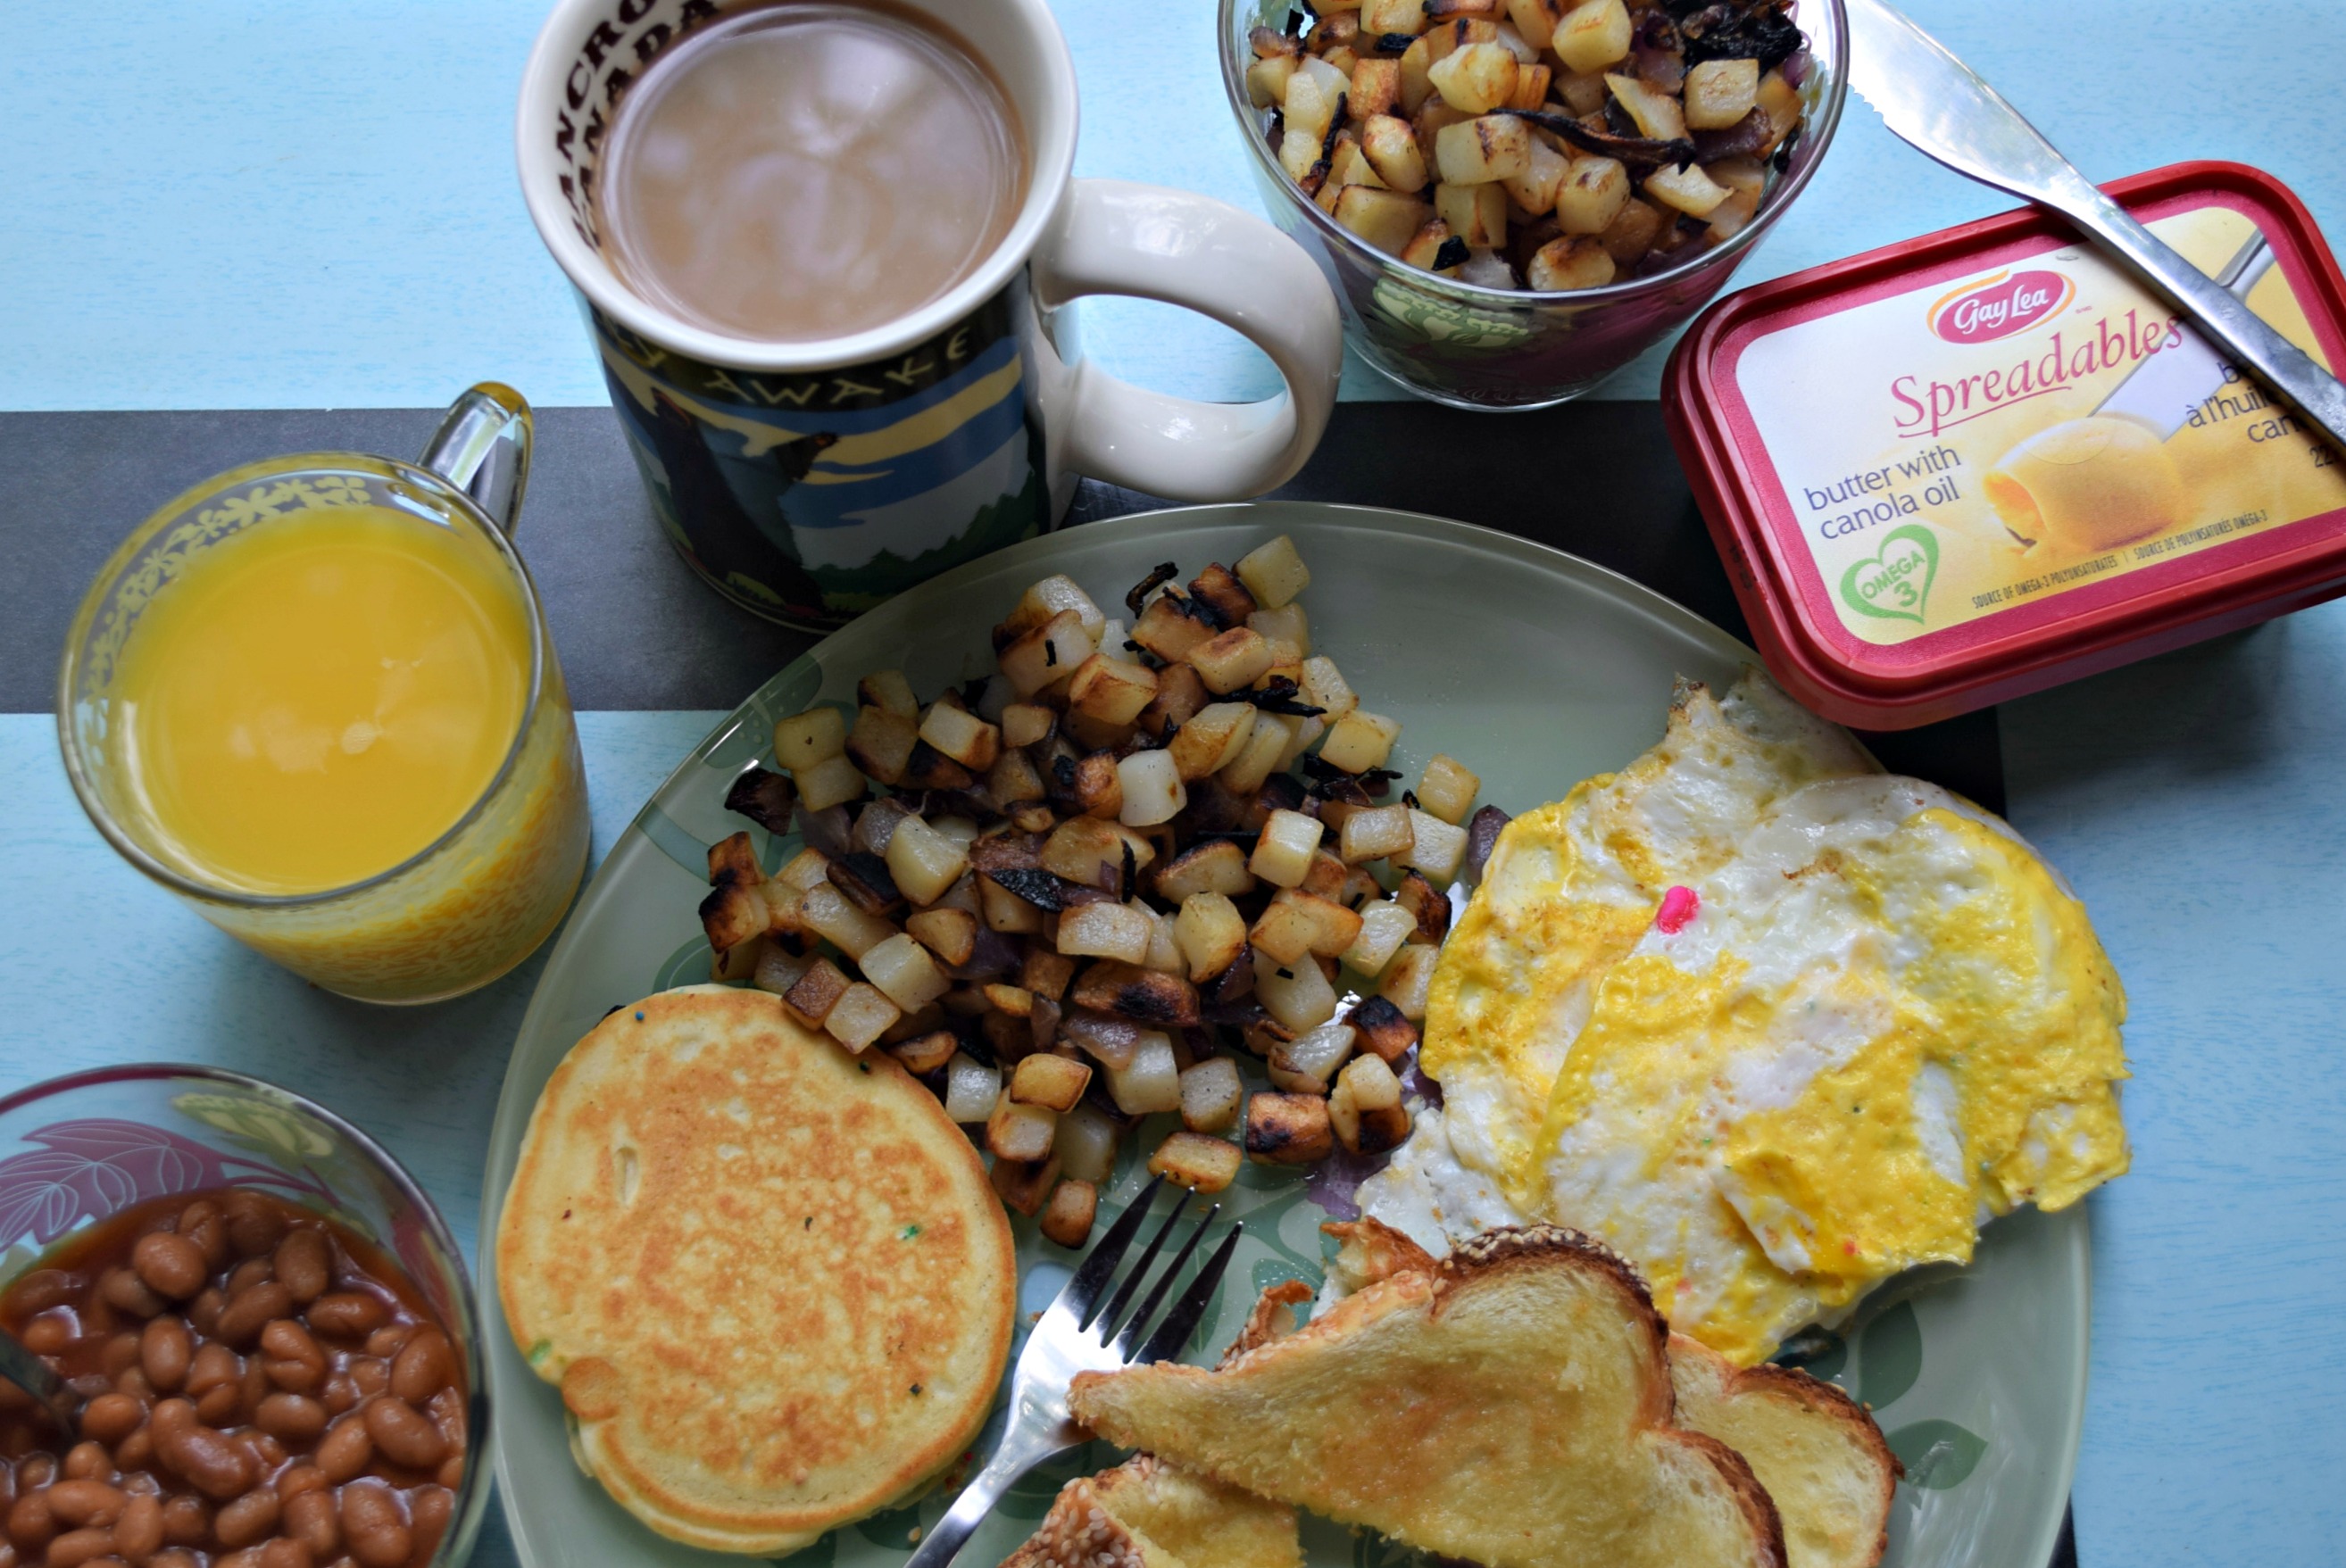 Breakfast meal ideas for the cottage - Mayahood